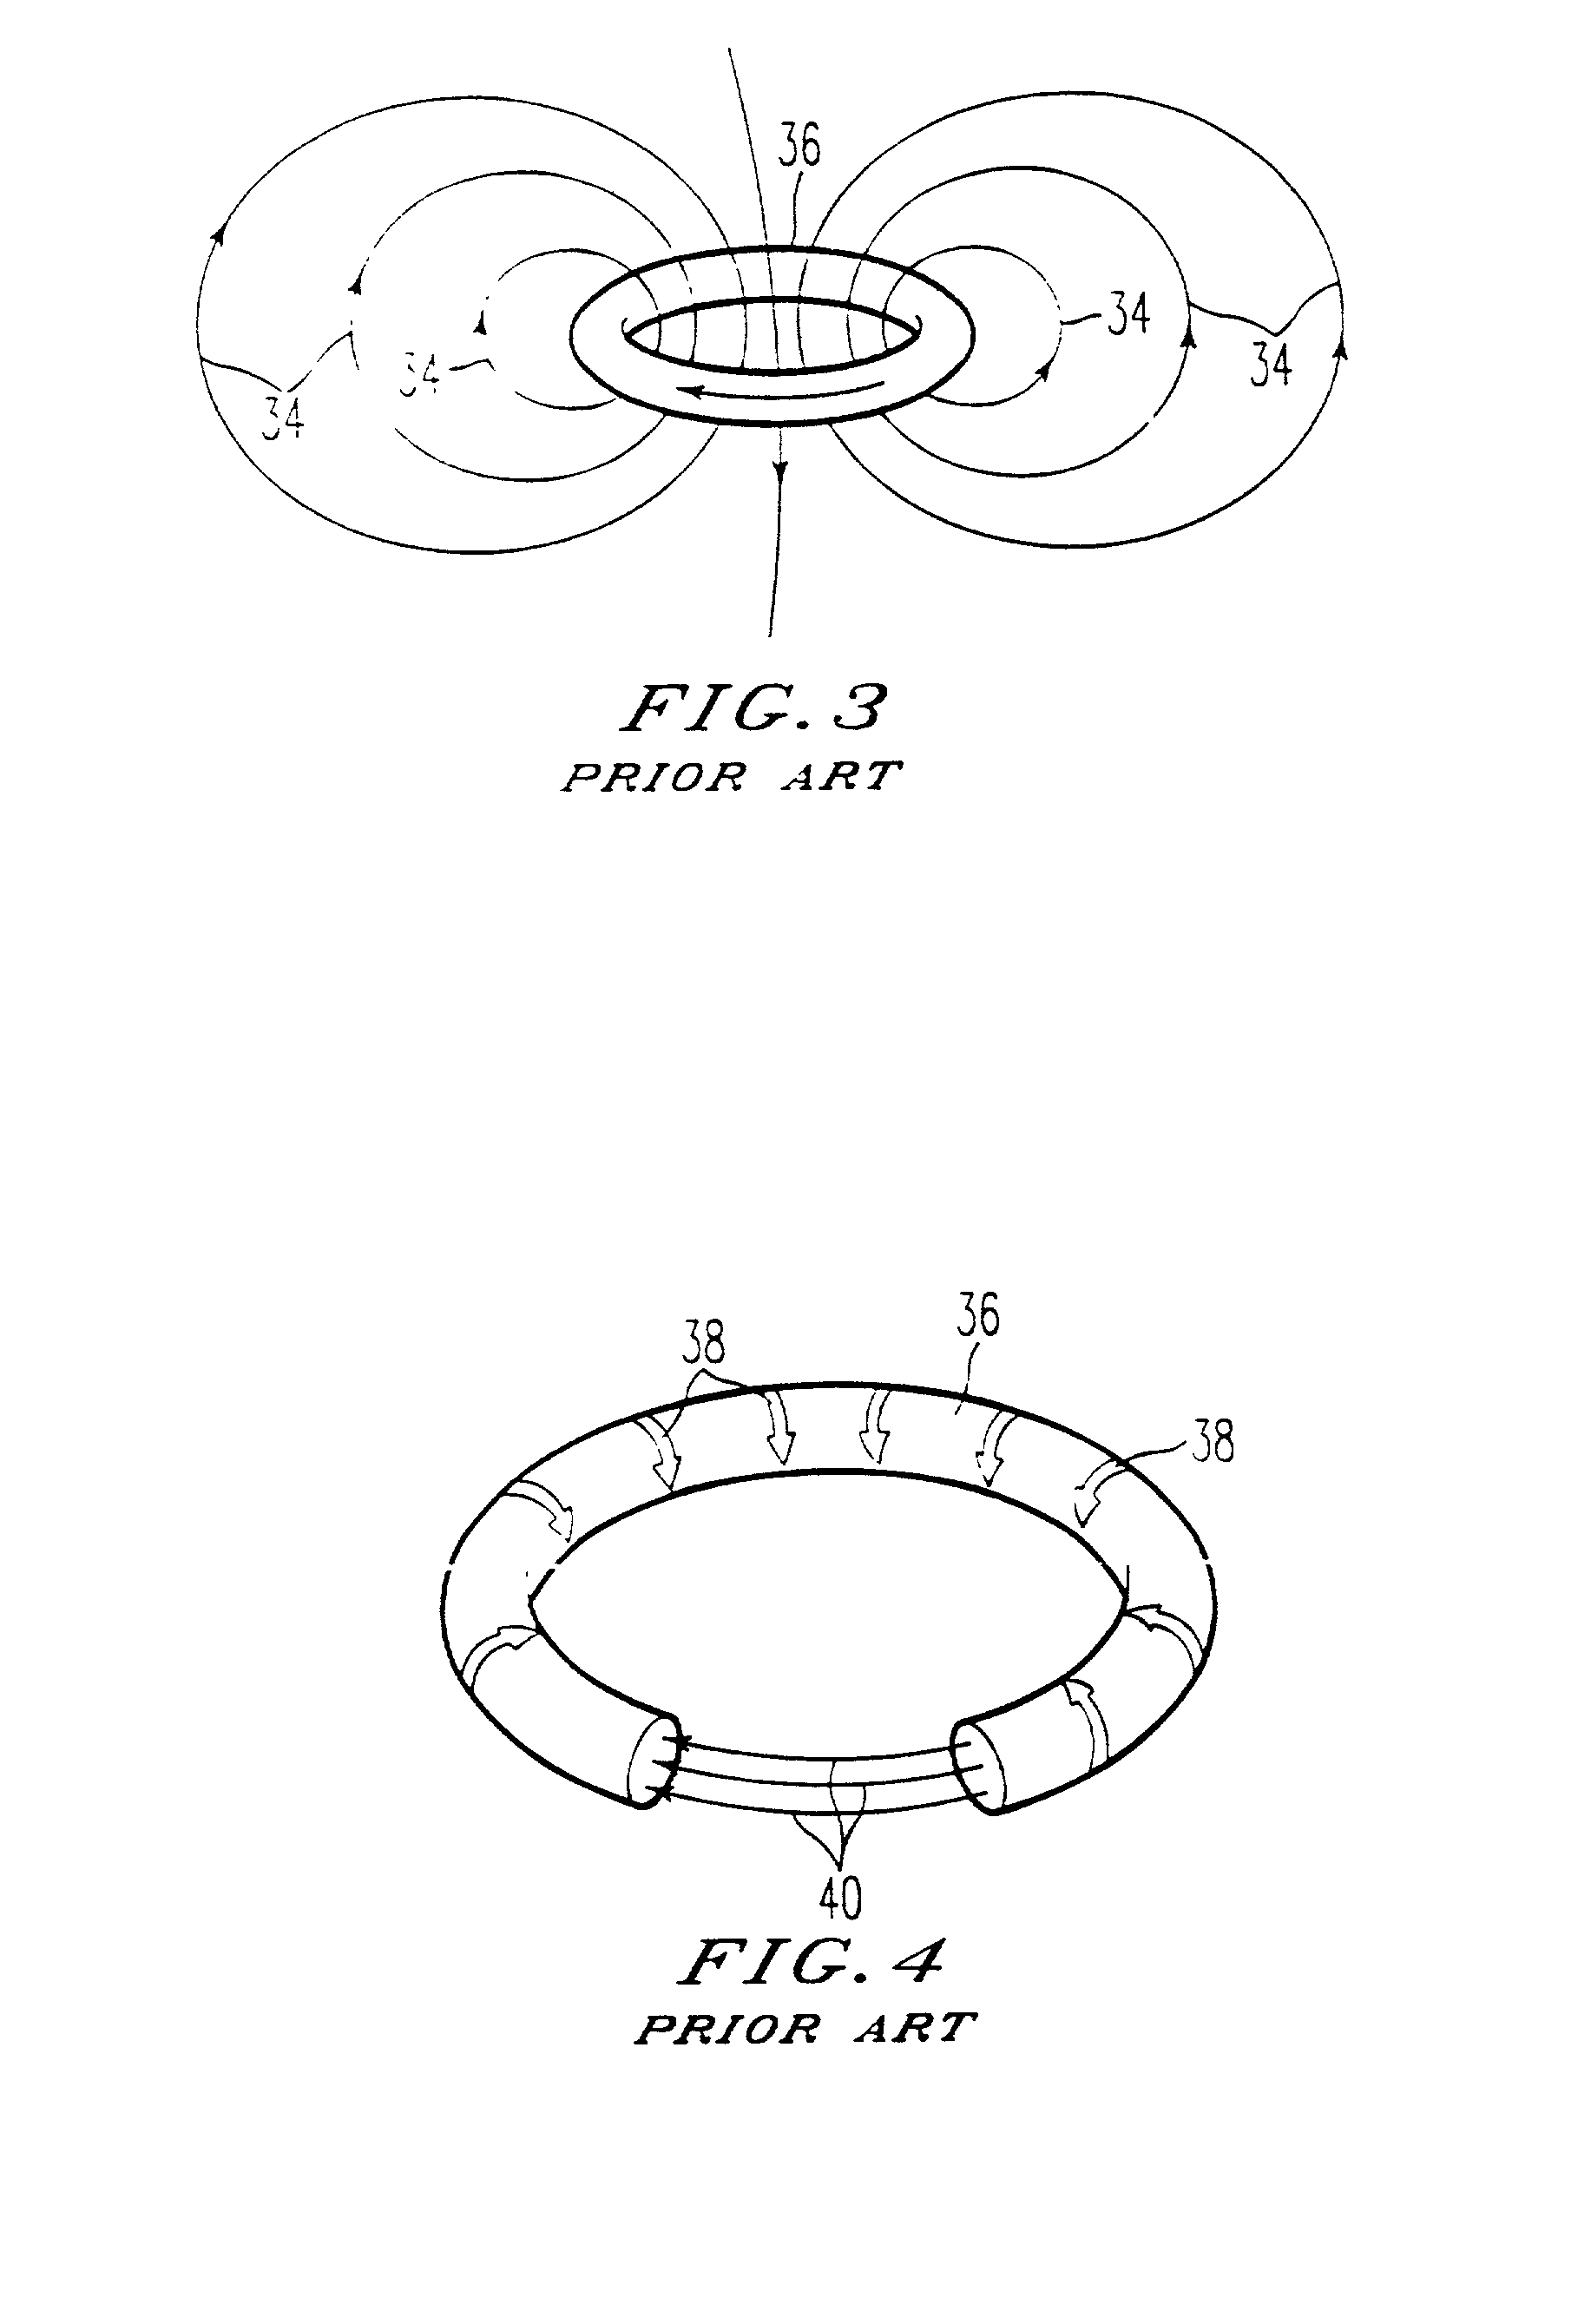 Compound plasma configuration, and method and apparatus for generating a compound plasma configuration